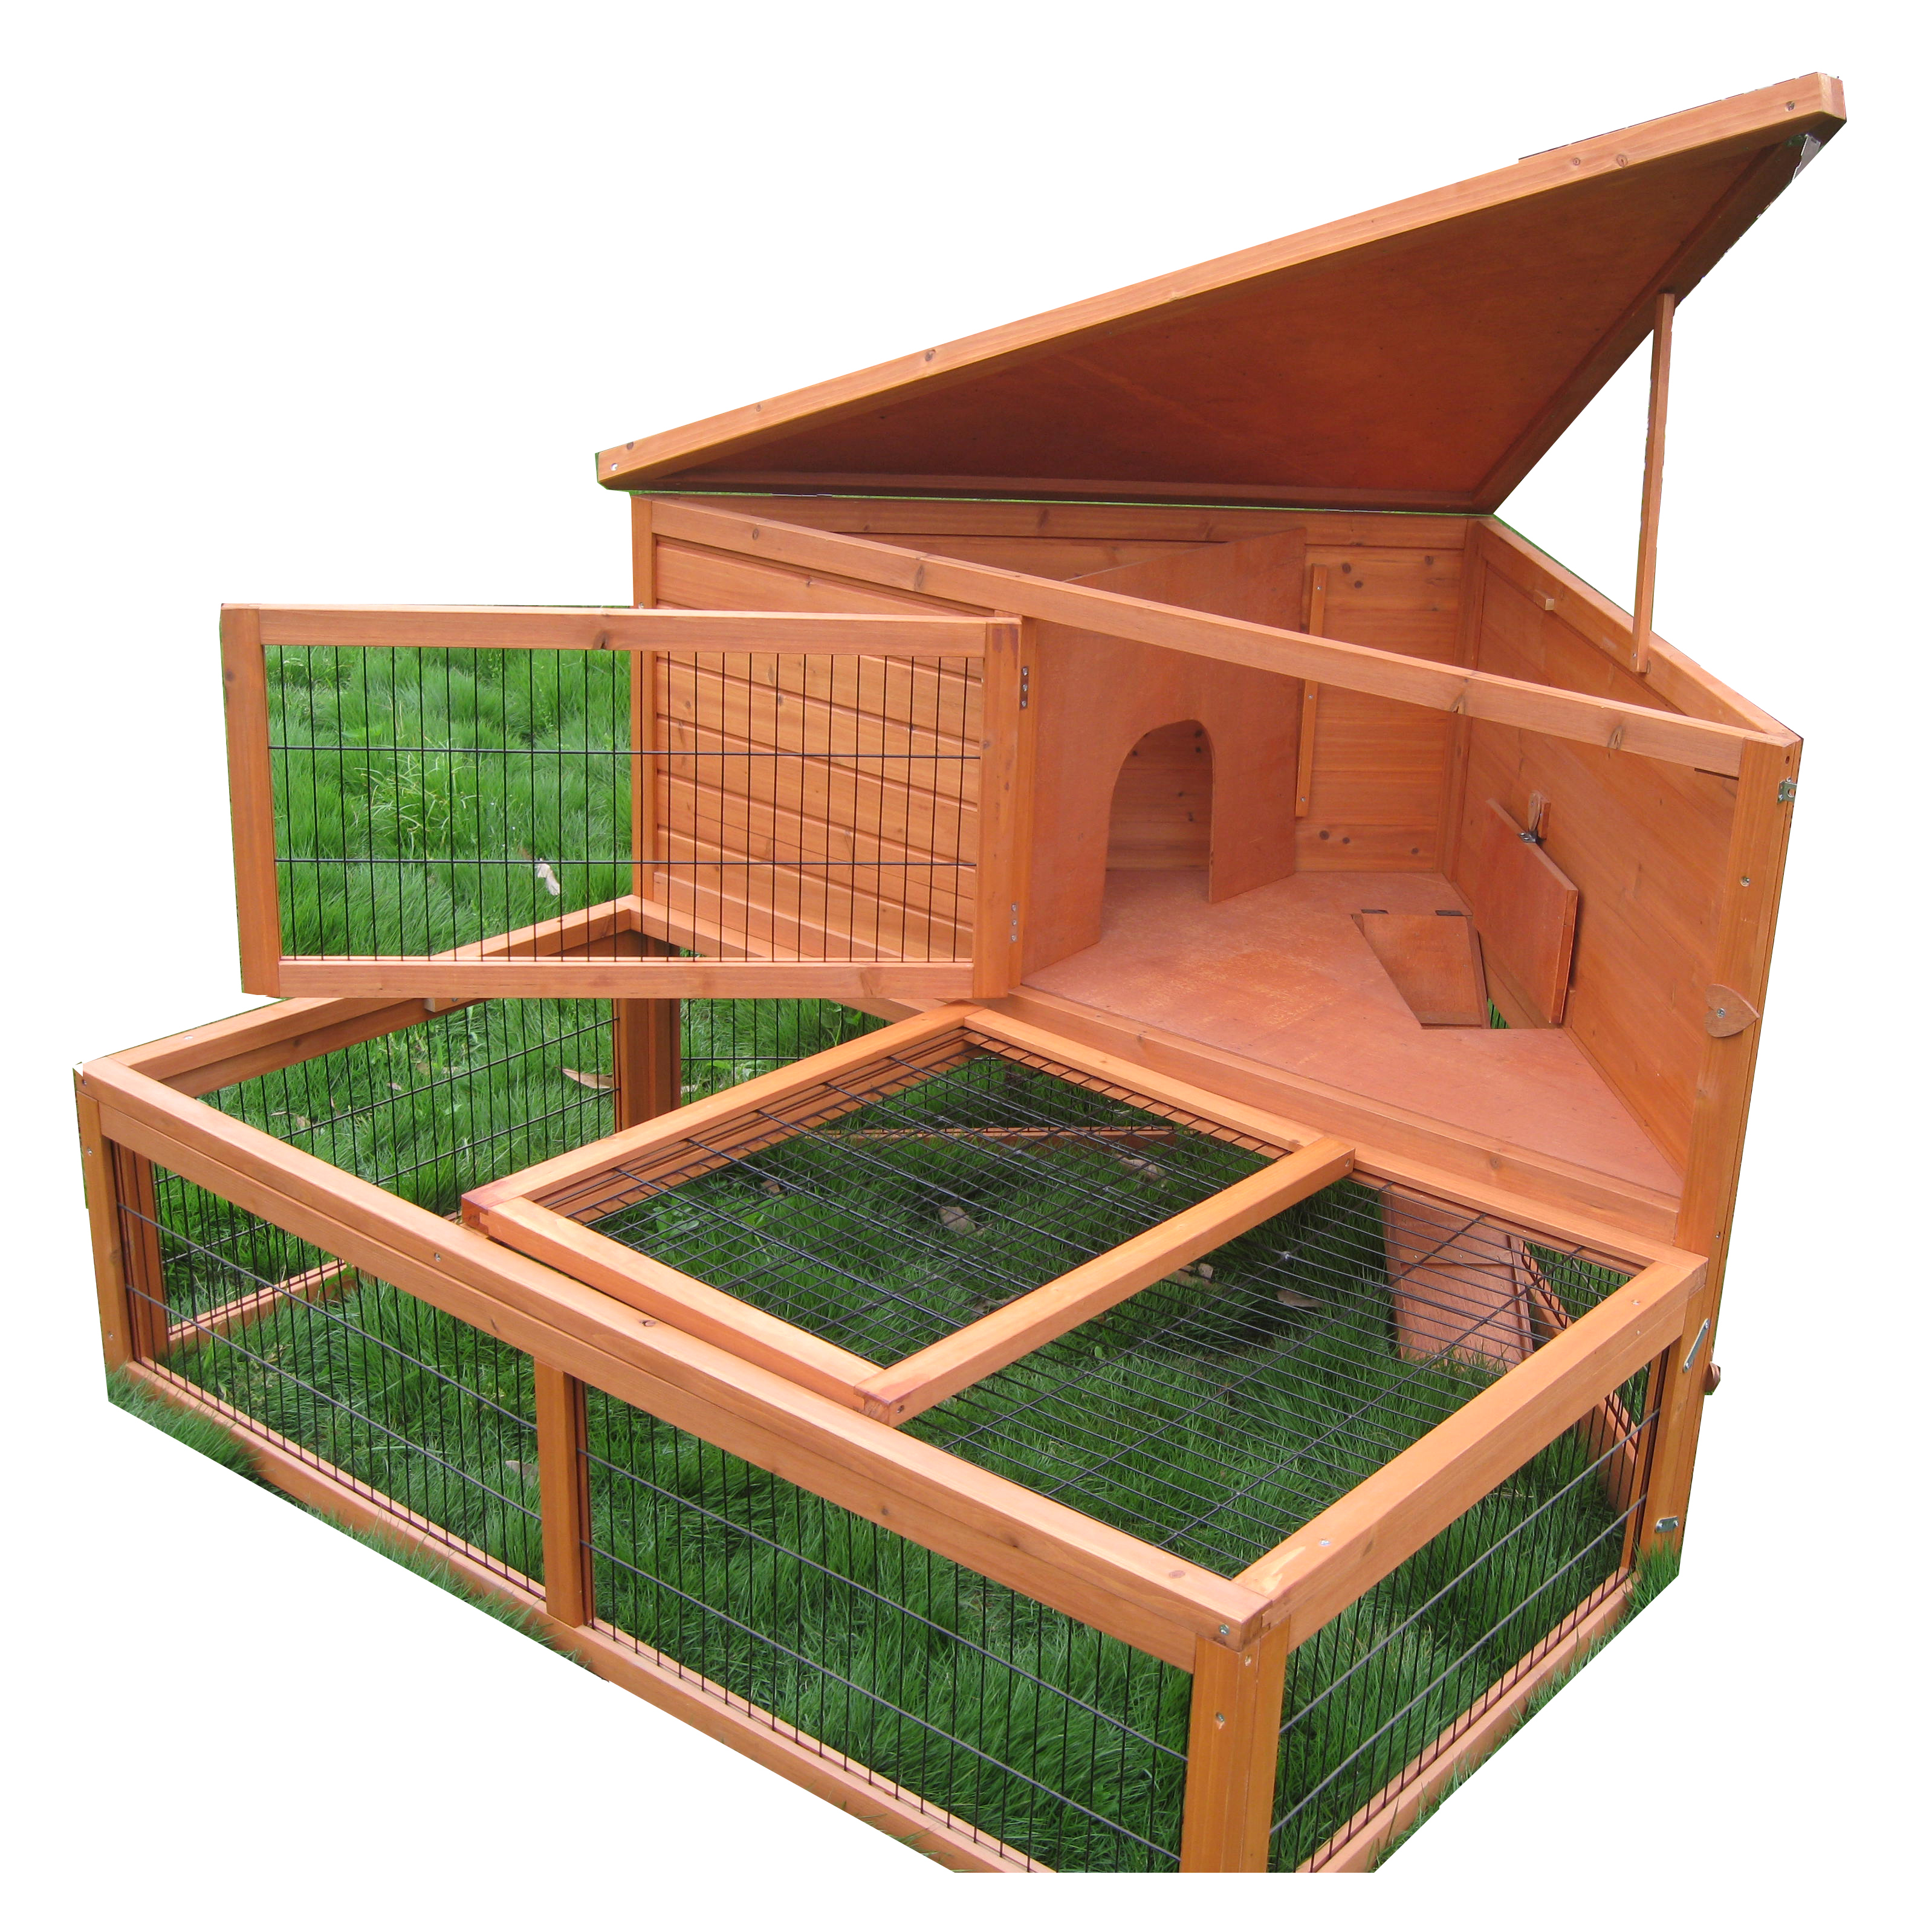 Fixed Competitive Price Best Rabbit Hutch -
 Factory custom Hideaway Guinea Pig Small Animal Fun Xxl Cage pet Rodent Wood 2 Floor Wooden Rabbit Hutch – Easy